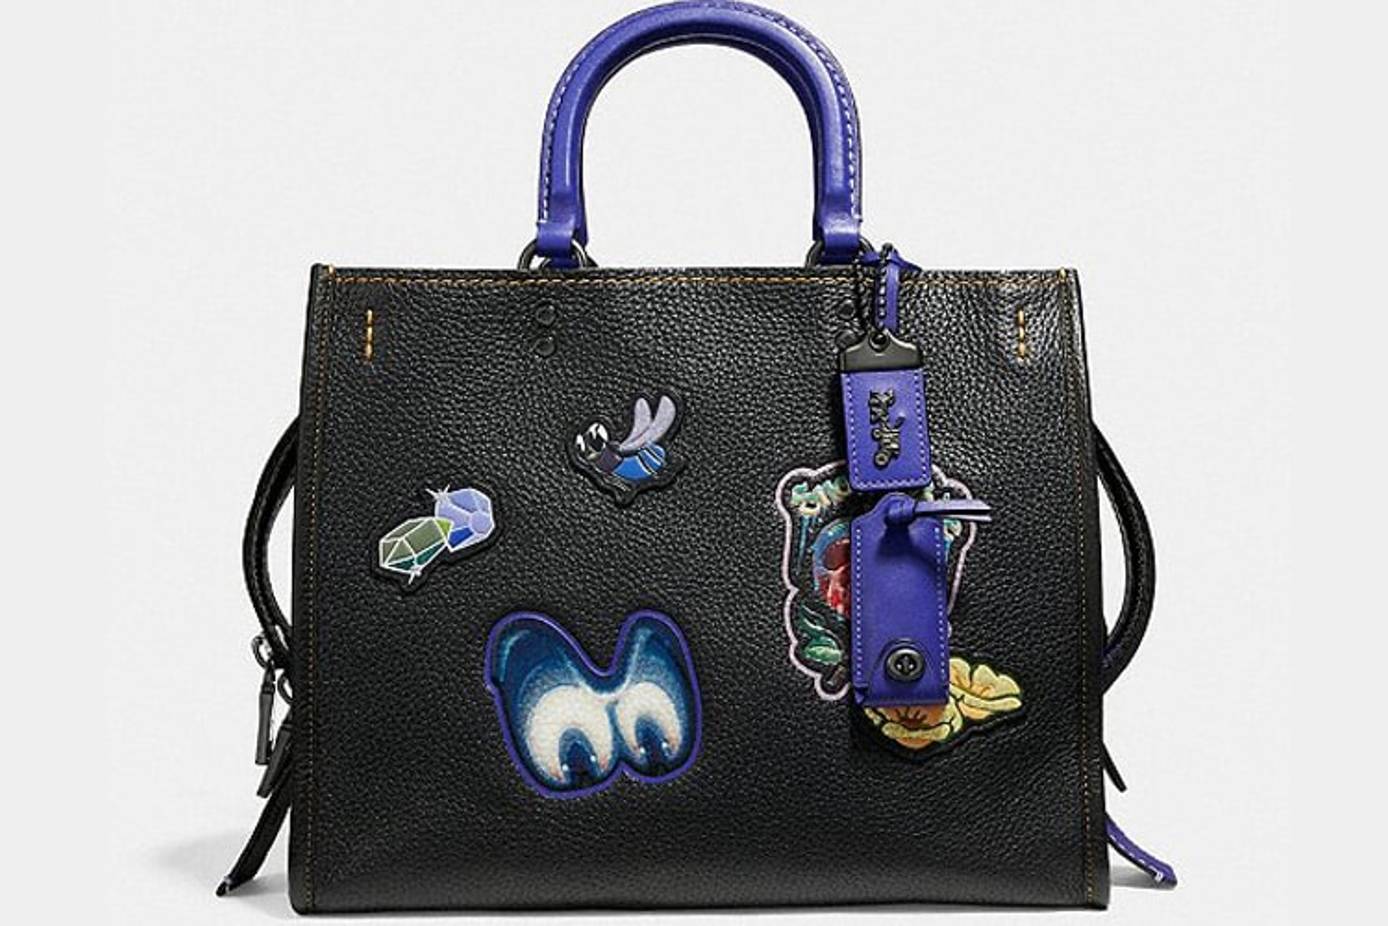 Stuart Vevers on Disney x Coach's A Dark Fairy Tale Collection and